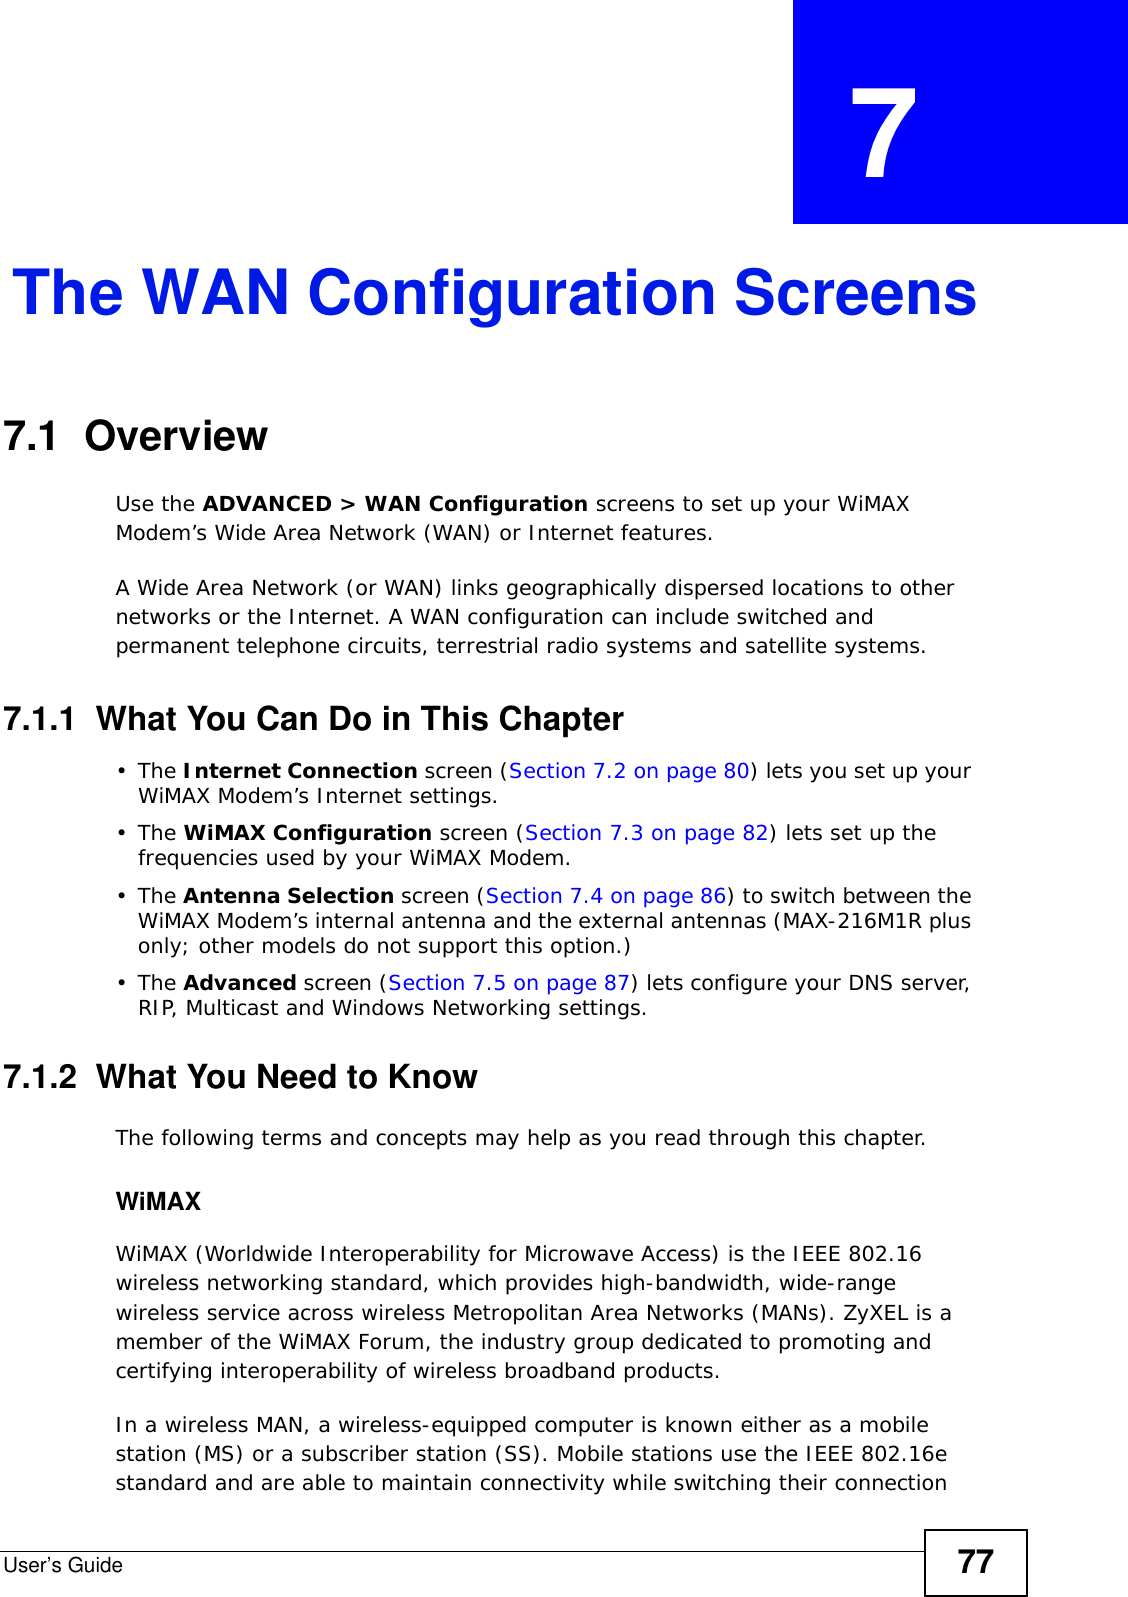 User’s Guide 77CHAPTER  7 The WAN Configuration Screens7.1  Overview Use the ADVANCED &gt; WAN Configuration screens to set up your WiMAX Modem’s Wide Area Network (WAN) or Internet features.A Wide Area Network (or WAN) links geographically dispersed locations to other networks or the Internet. A WAN configuration can include switched and permanent telephone circuits, terrestrial radio systems and satellite systems.7.1.1  What You Can Do in This Chapter•The Internet Connection screen (Section 7.2 on page 80) lets you set up your WiMAX Modem’s Internet settings.•The WiMAX Configuration screen (Section 7.3 on page 82) lets set up the frequencies used by your WiMAX Modem.•The Antenna Selection screen (Section 7.4 on page 86) to switch between the WiMAX Modem’s internal antenna and the external antennas (MAX-216M1R plus only; other models do not support this option.)•The Advanced screen (Section 7.5 on page 87) lets configure your DNS server, RIP, Multicast and Windows Networking settings.7.1.2  What You Need to KnowThe following terms and concepts may help as you read through this chapter.WiMAX WiMAX (Worldwide Interoperability for Microwave Access) is the IEEE 802.16 wireless networking standard, which provides high-bandwidth, wide-range wireless service across wireless Metropolitan Area Networks (MANs). ZyXEL is a member of the WiMAX Forum, the industry group dedicated to promoting and certifying interoperability of wireless broadband products.In a wireless MAN, a wireless-equipped computer is known either as a mobile station (MS) or a subscriber station (SS). Mobile stations use the IEEE 802.16e standard and are able to maintain connectivity while switching their connection 